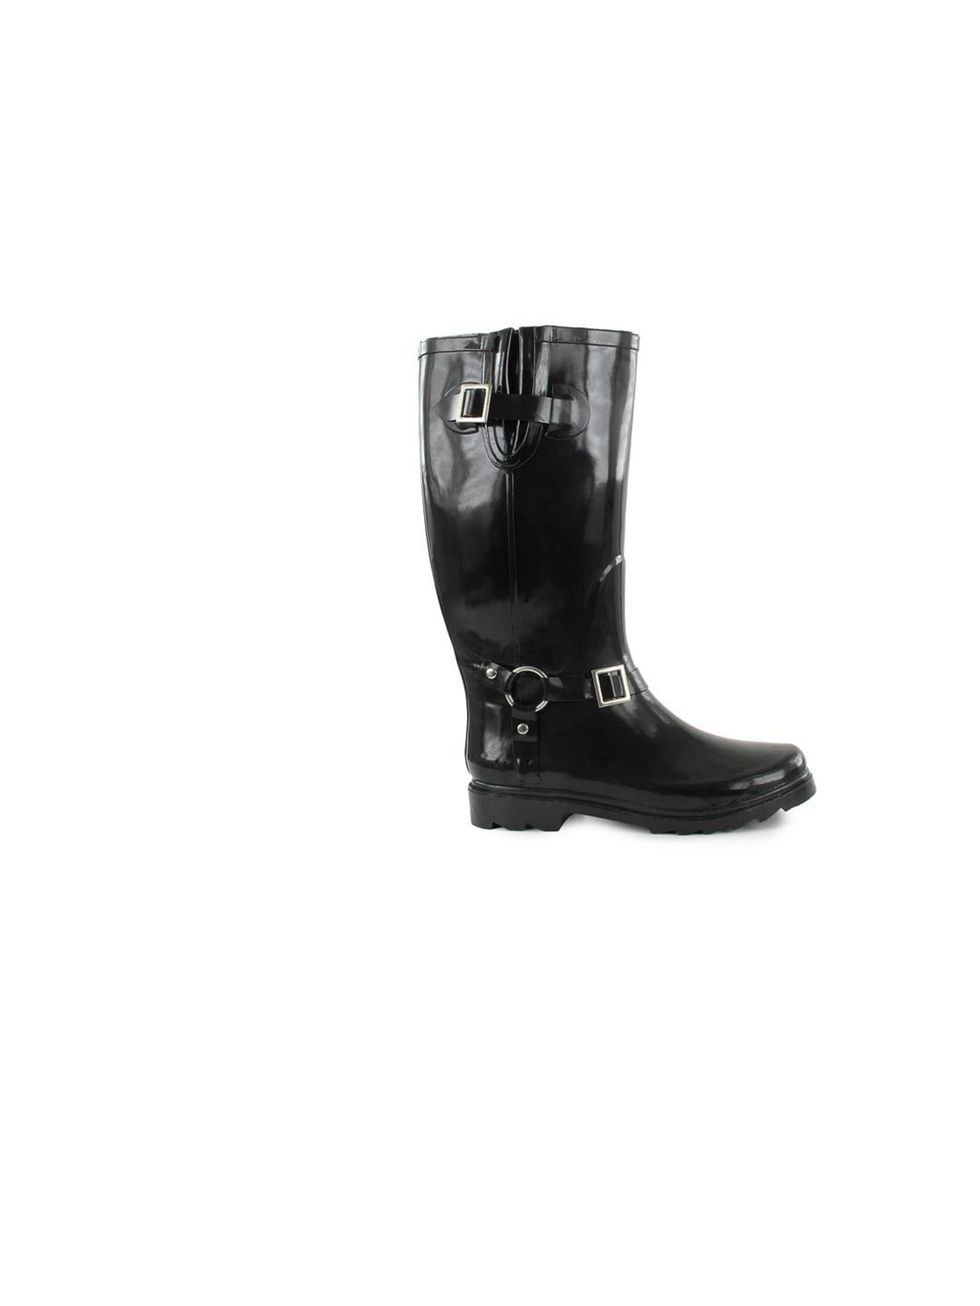 <p>Timeless wellies, £30.95, at <a href="http://nelly.com/uk/shoes-women/shoes/everyday-shoes/timeless-770/nelly-770096-14/">Nelly.com</a></p>